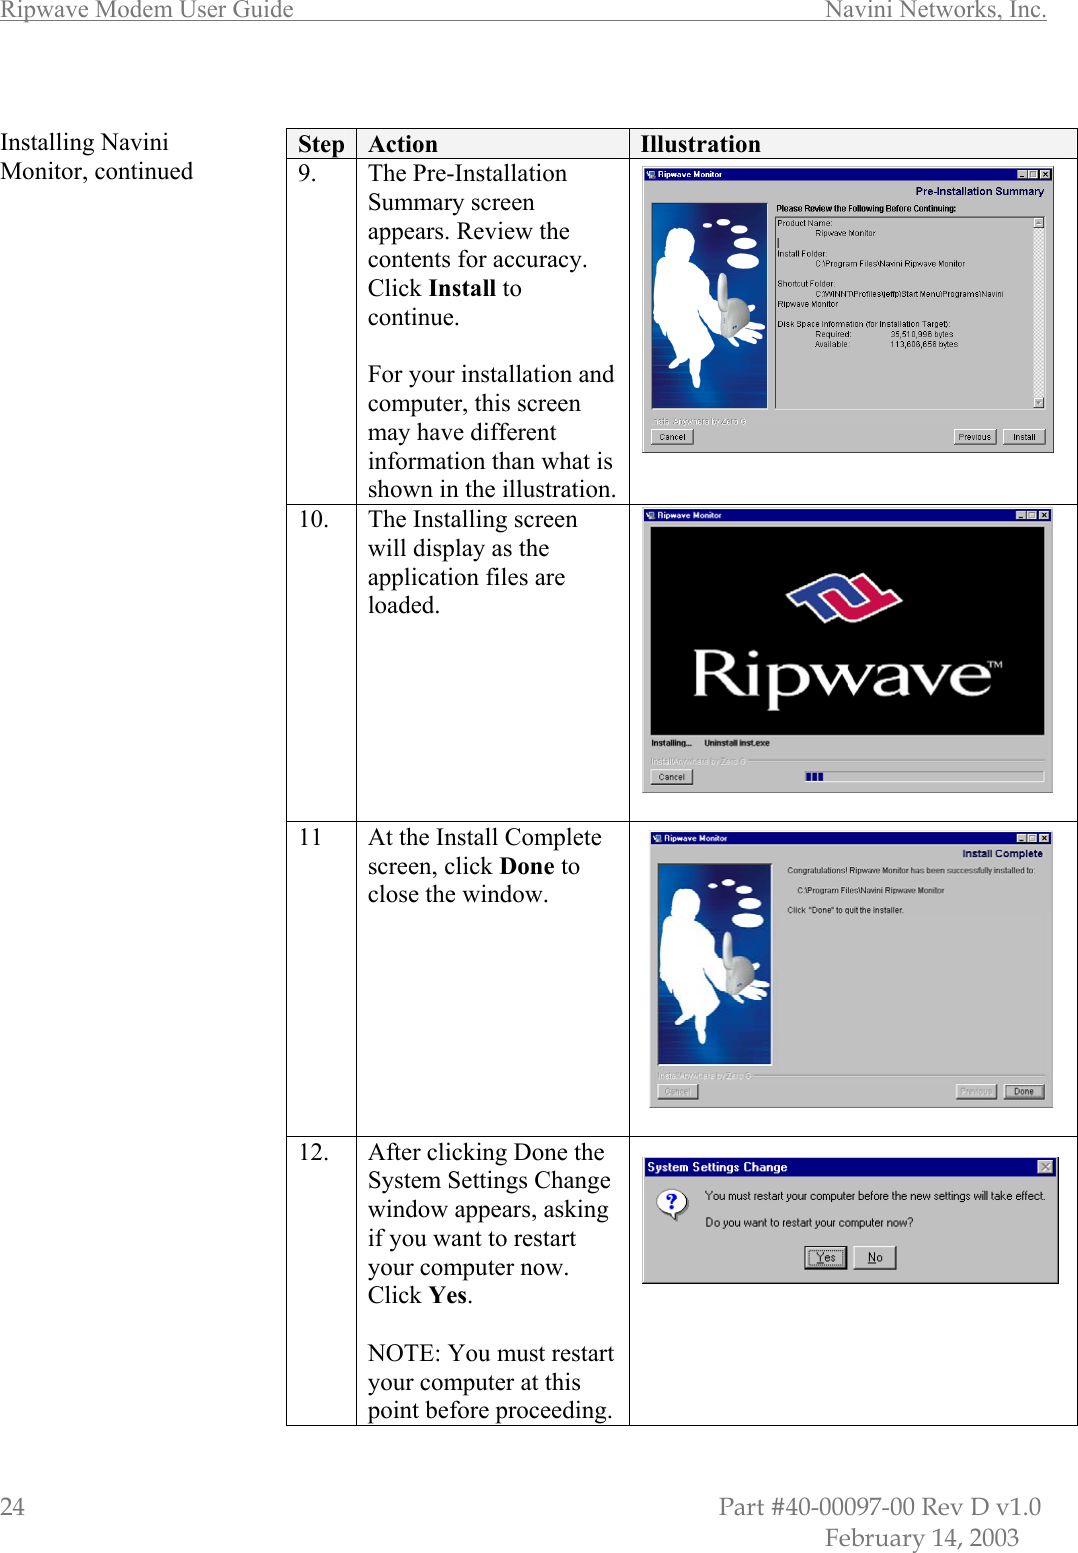 Ripwave Modem User Guide        Navini Networks, Inc. 24                         Part #40-00097-00 Rev D v1.0            February 14, 2003  Installing Navini Monitor, continued                                             Step  Action  Illustration 9. The Pre-Installation Summary screen appears. Review the contents for accuracy. Click Install to continue.   For your installation and computer, this screen may have different information than what is shown in the illustration.  10.  The Installing screen will display as the application files are loaded.  11  At the Install Complete screen, click Done to close the window.  12.  After clicking Done the System Settings Change window appears, asking if you want to restart your computer now. Click Yes.  NOTE: You must restart your computer at this point before proceeding.  